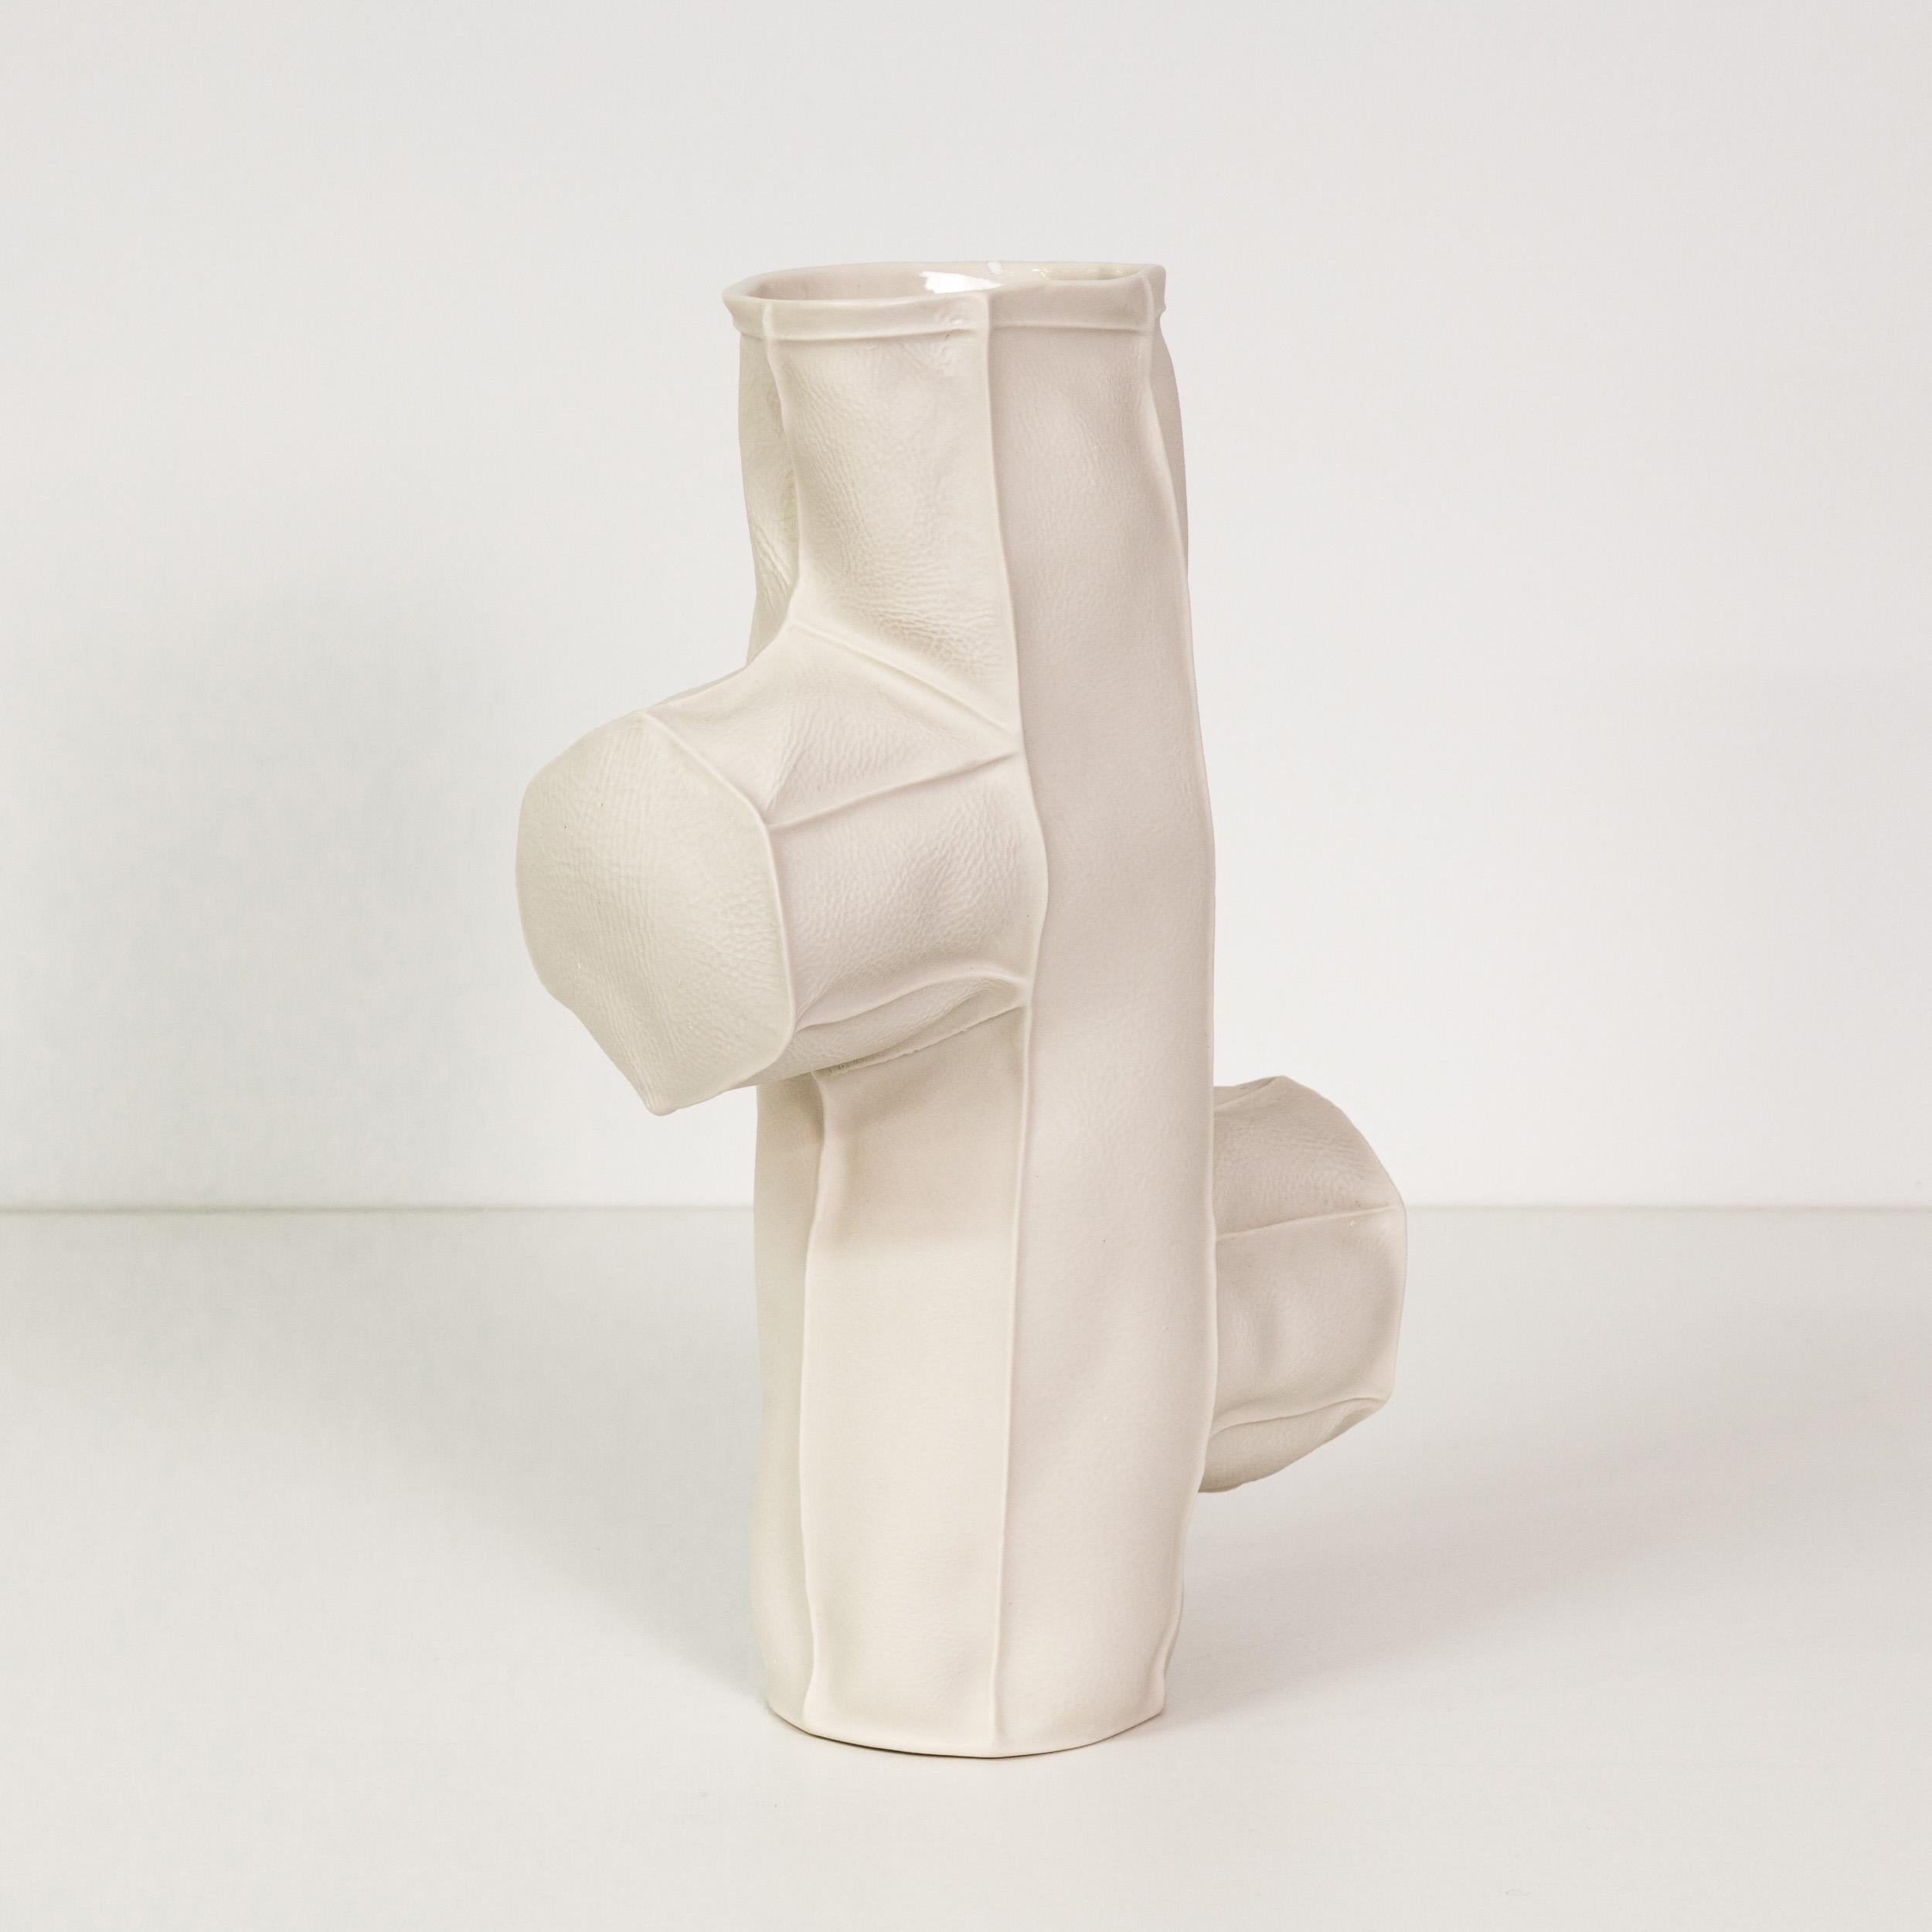 Modern In-Stock Ceramic Kawa Vase 18 freeform organic sculpture leather textured SECOND For Sale